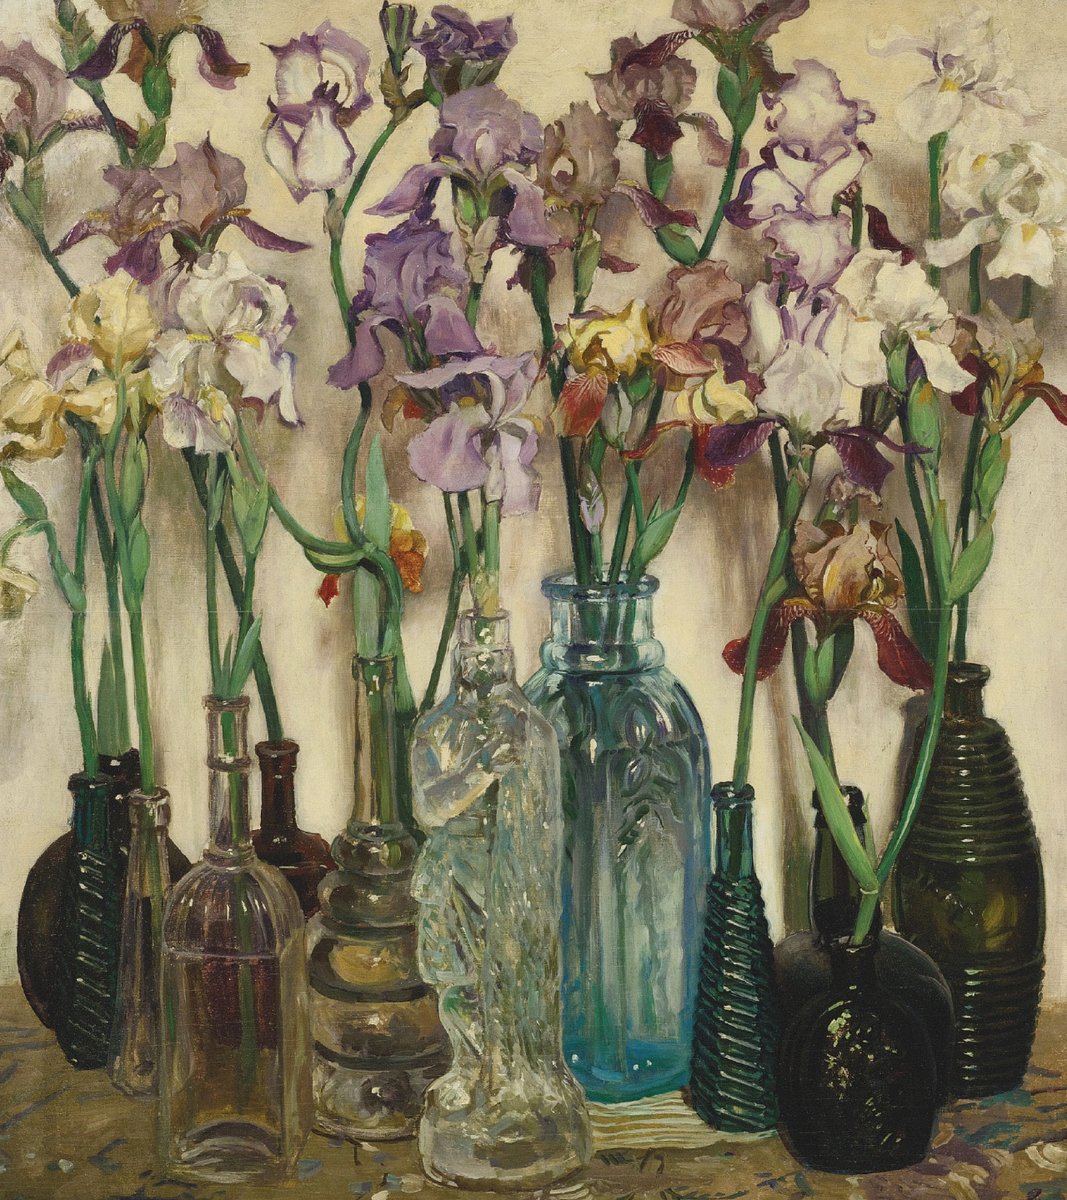 Rum Row (1922), by Frederick Judd Waugh